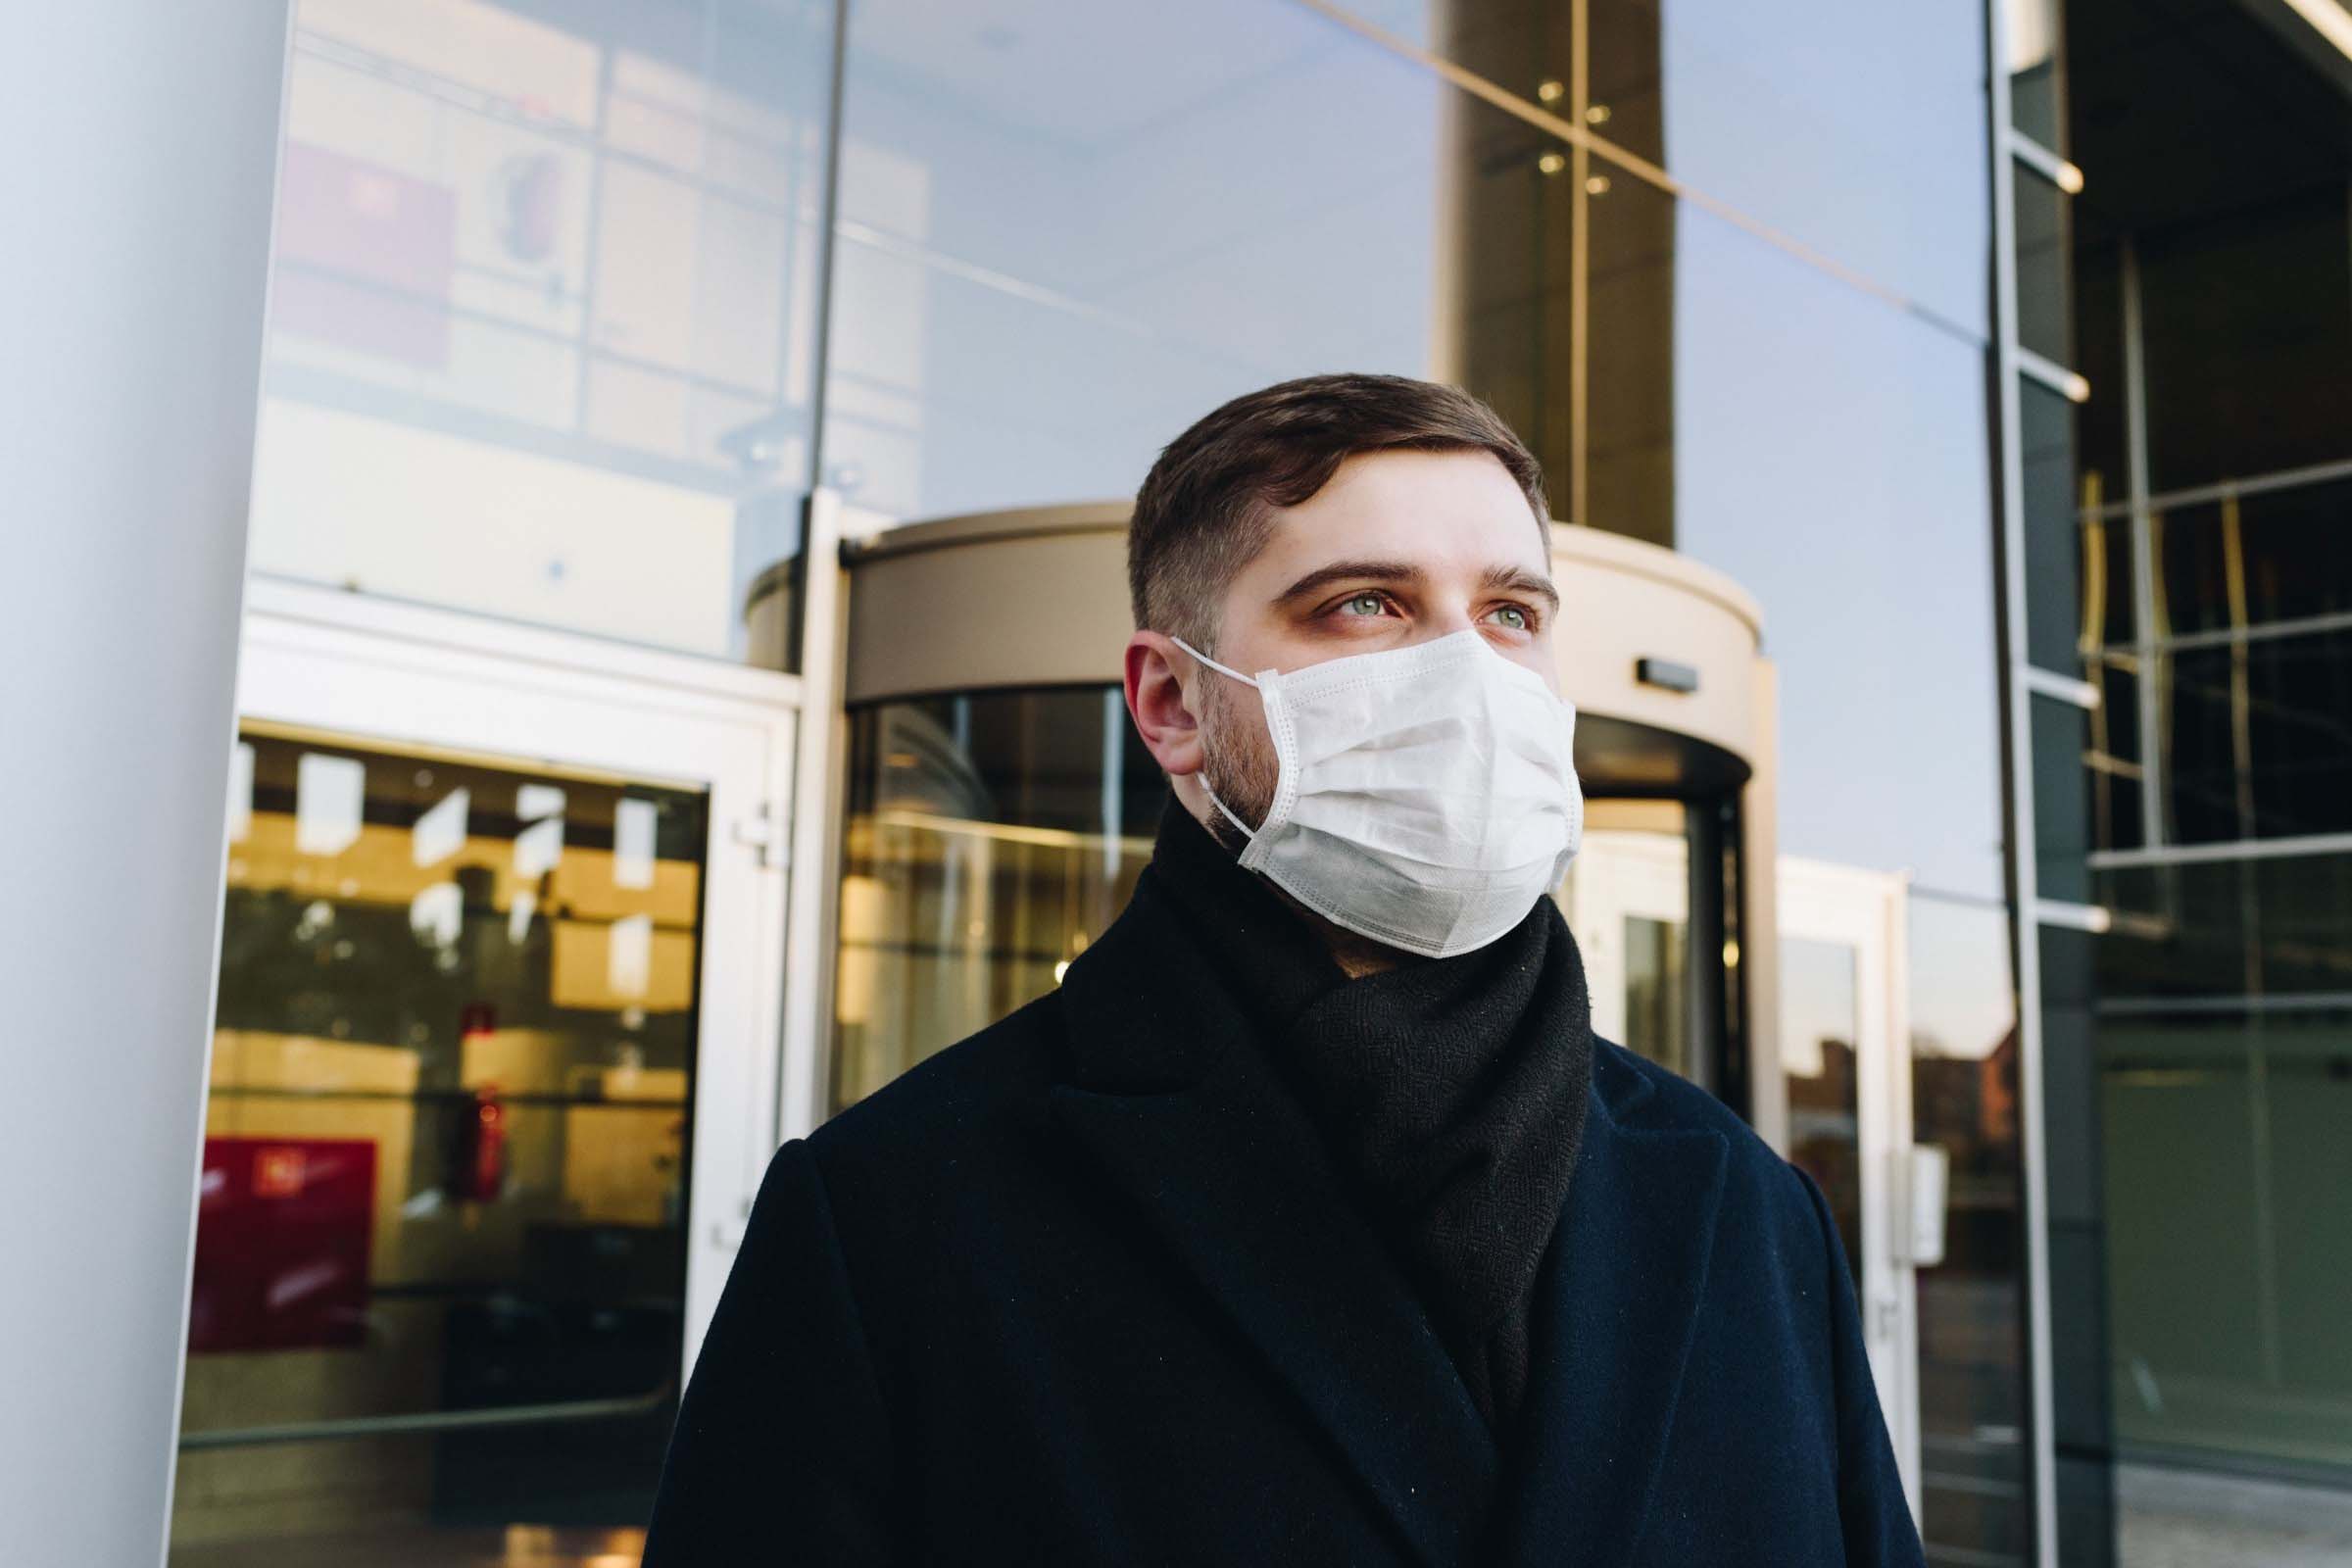 business leader shown with a facemask during the coronavirus times